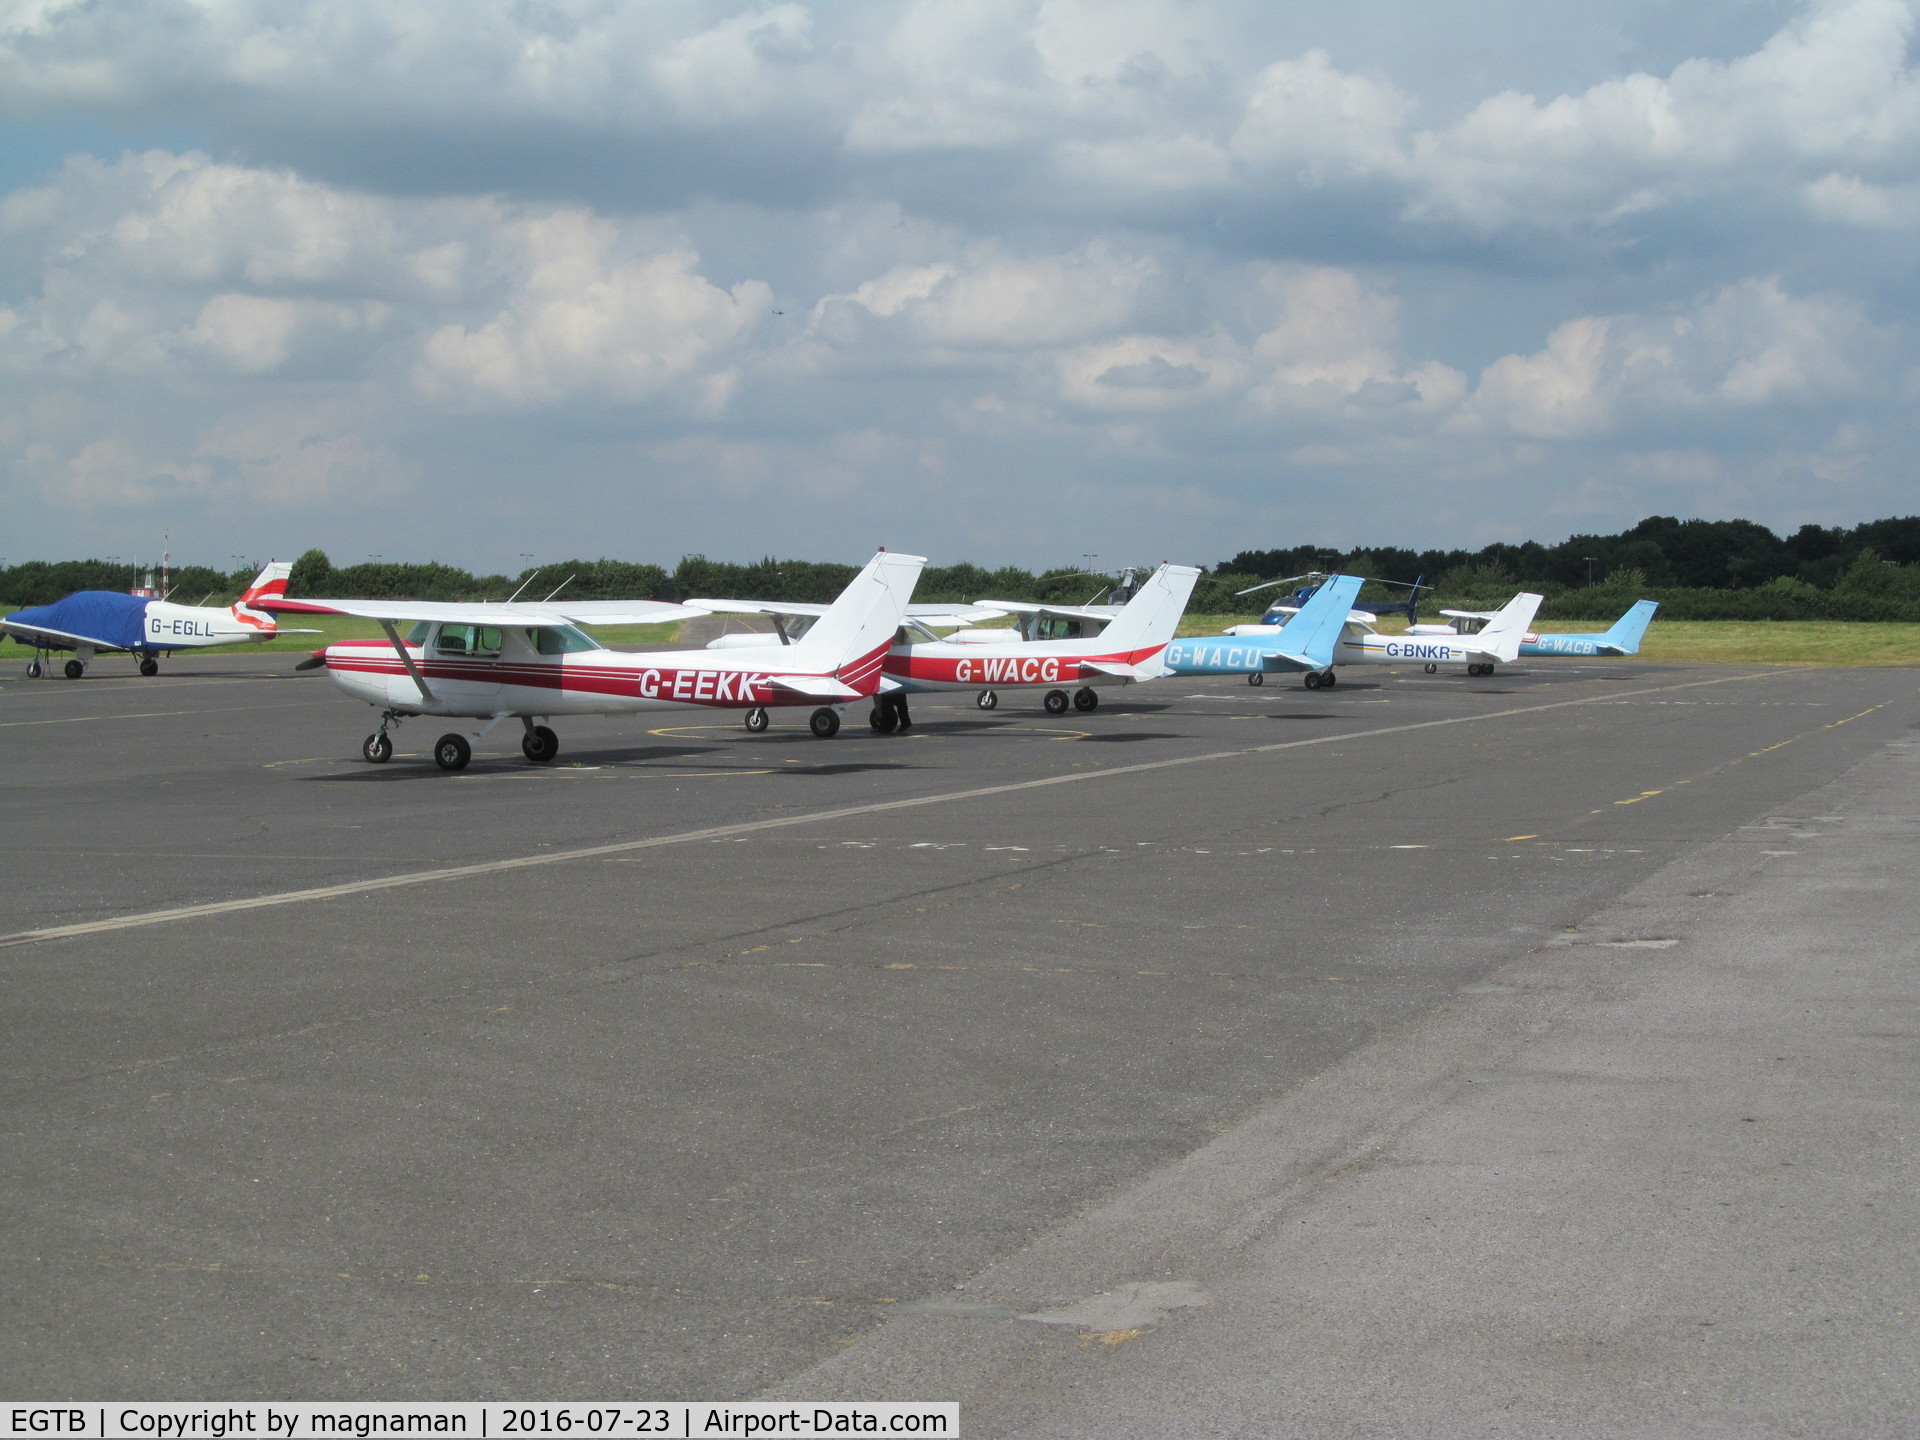 Wycombe Air Park/Booker Airport, High Wycombe, England United Kingdom (EGTB) - apron at high wycombe